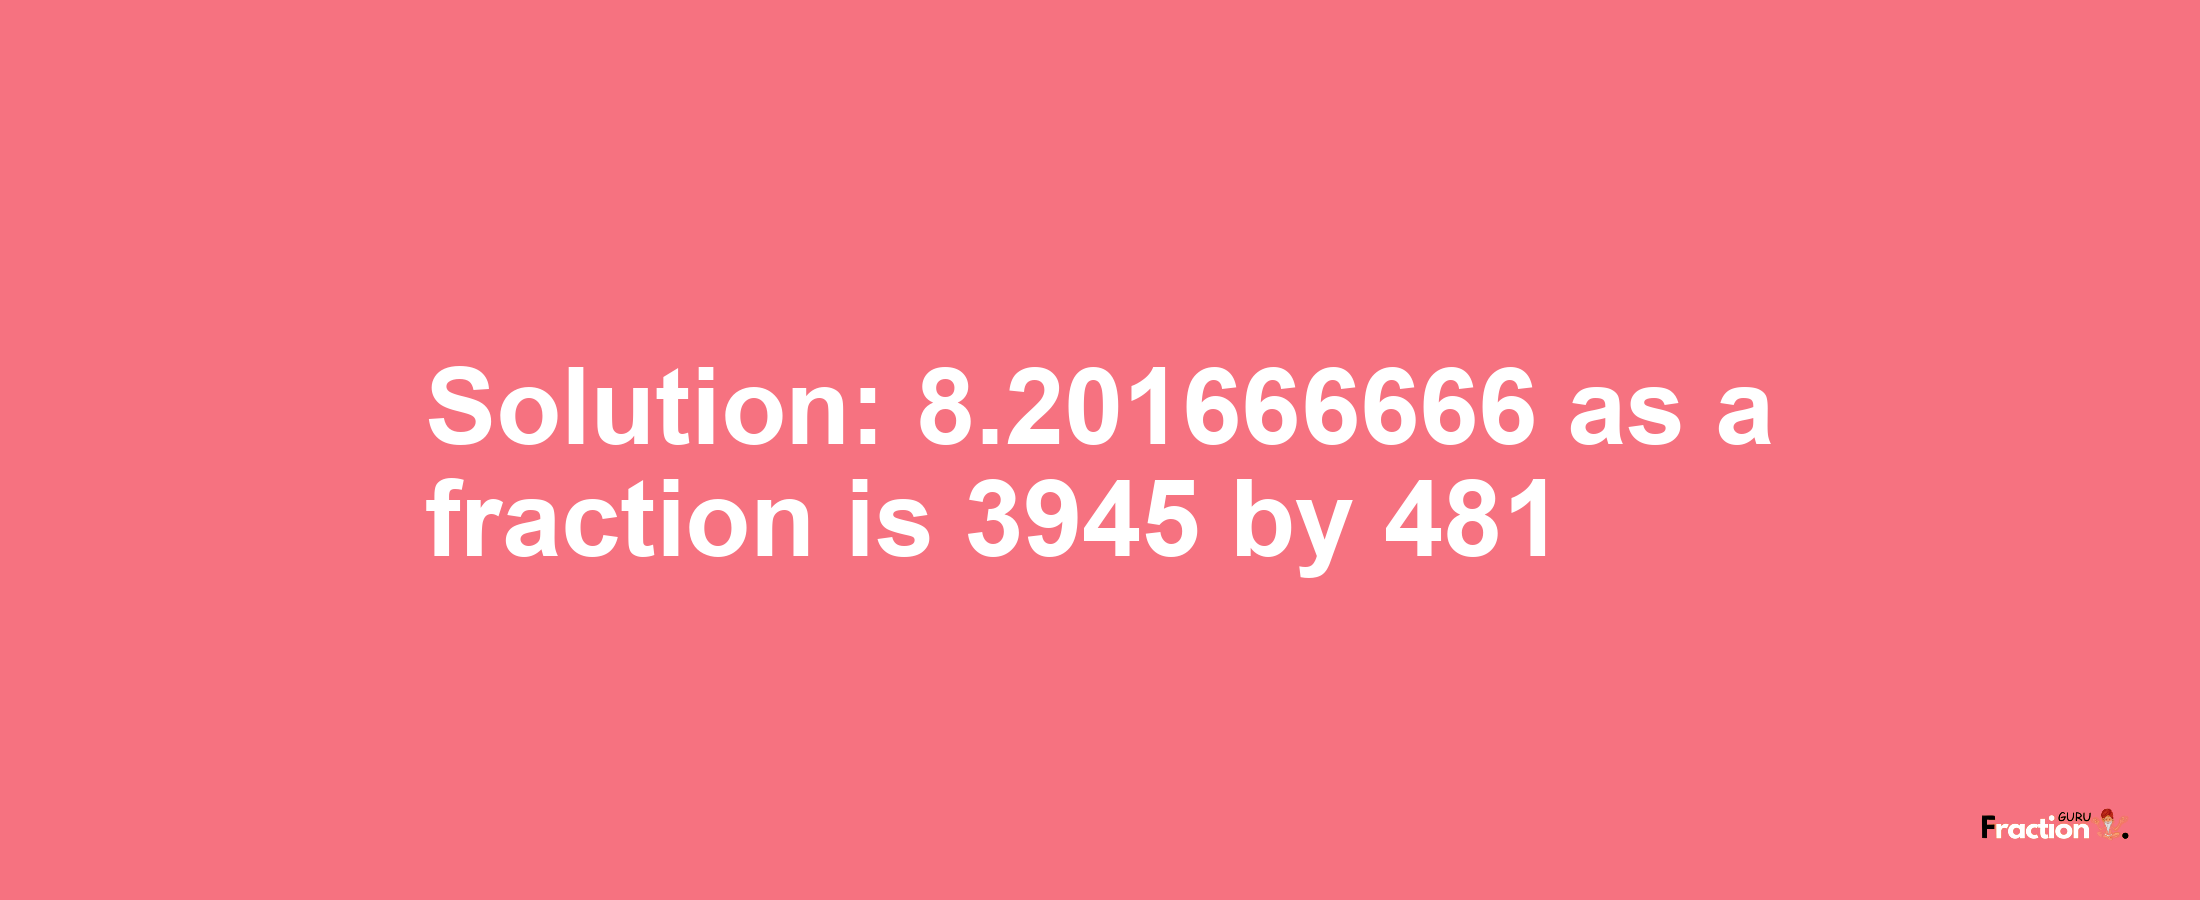 Solution:8.201666666 as a fraction is 3945/481